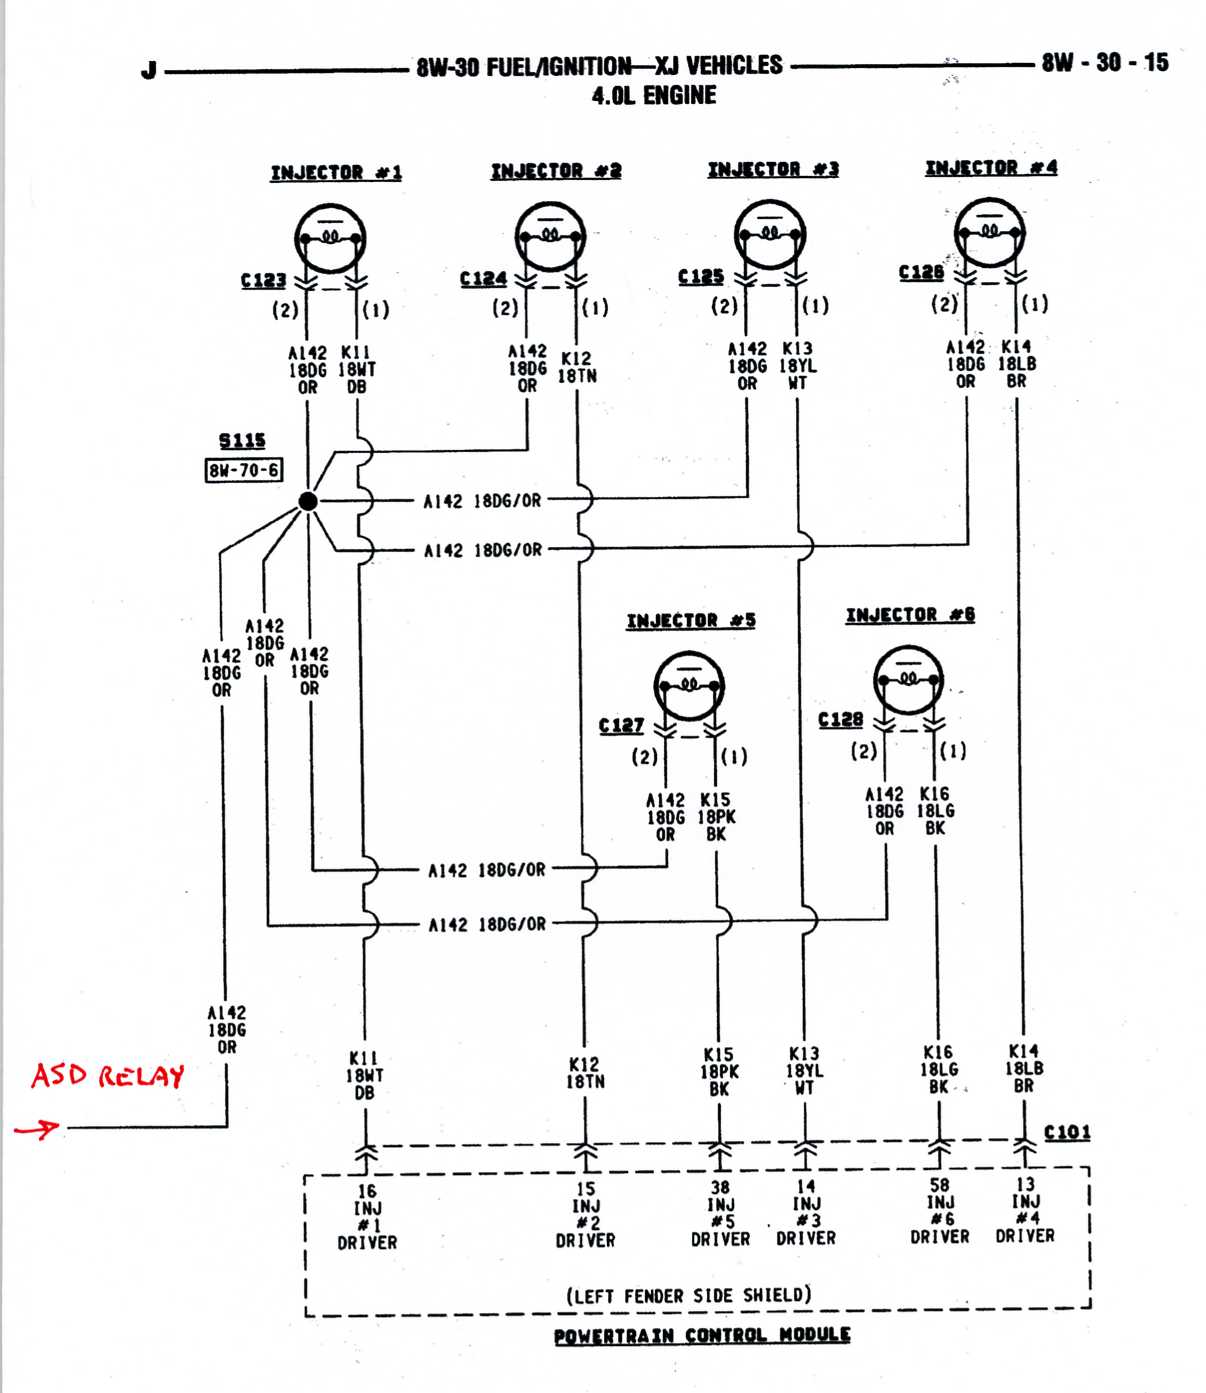 number 5 injector not pulsing - Jeep Cherokee Forum 95 mitsubishi eclipse fuel injection wiring diagram 